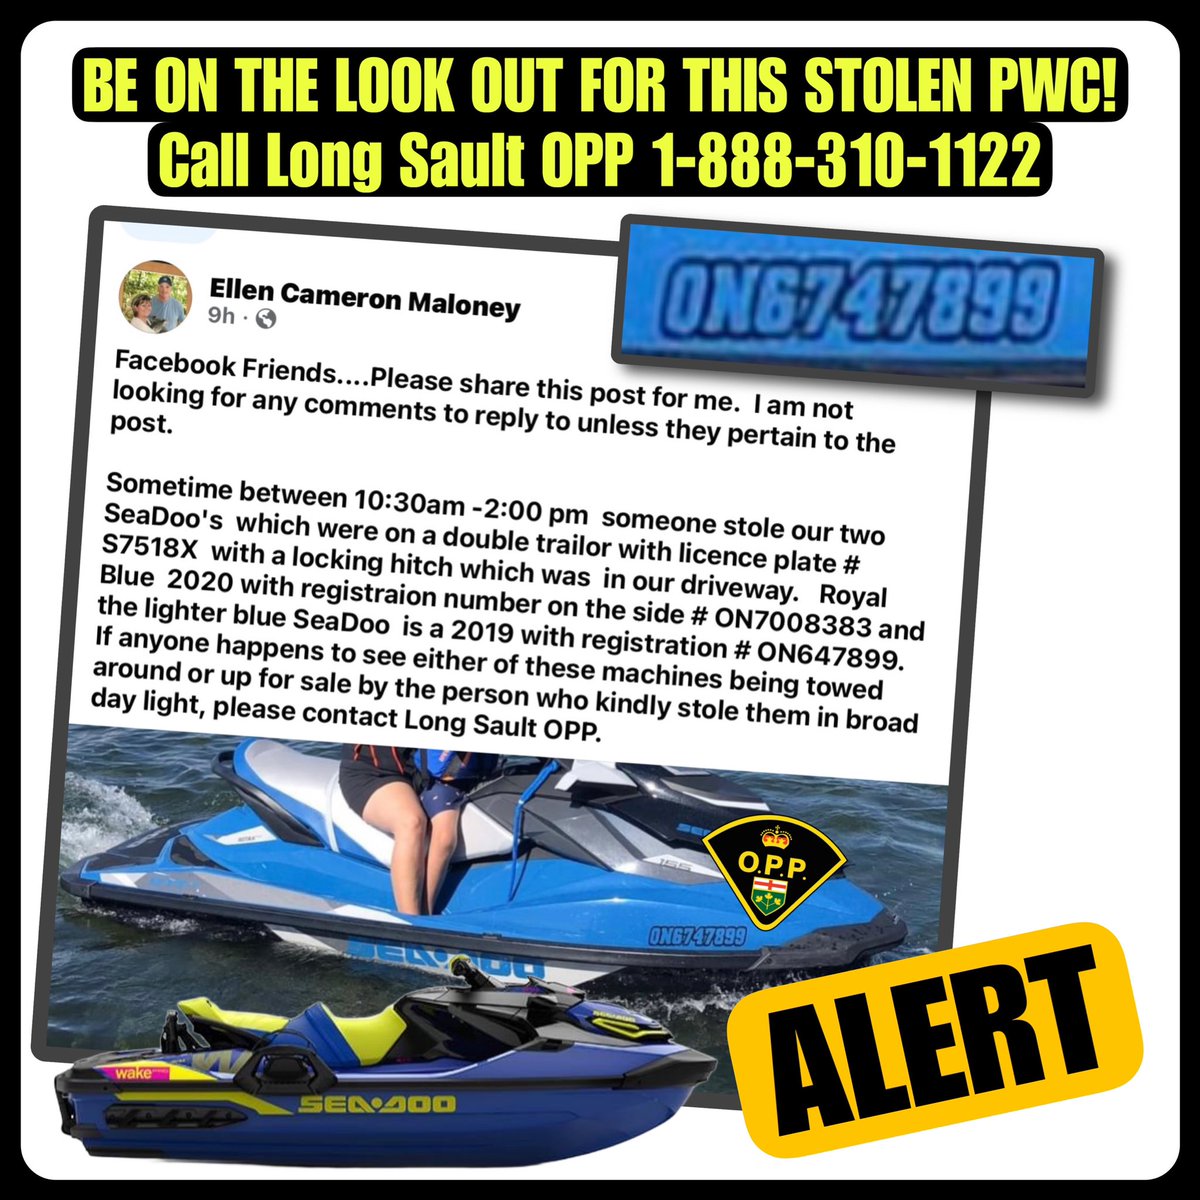 Let's find who did this! #ygk #Kingston #cornwall #morrisburg #chesterville #winchester #brockville #gananoque #longsault #alert #crime #pwc #seadoo